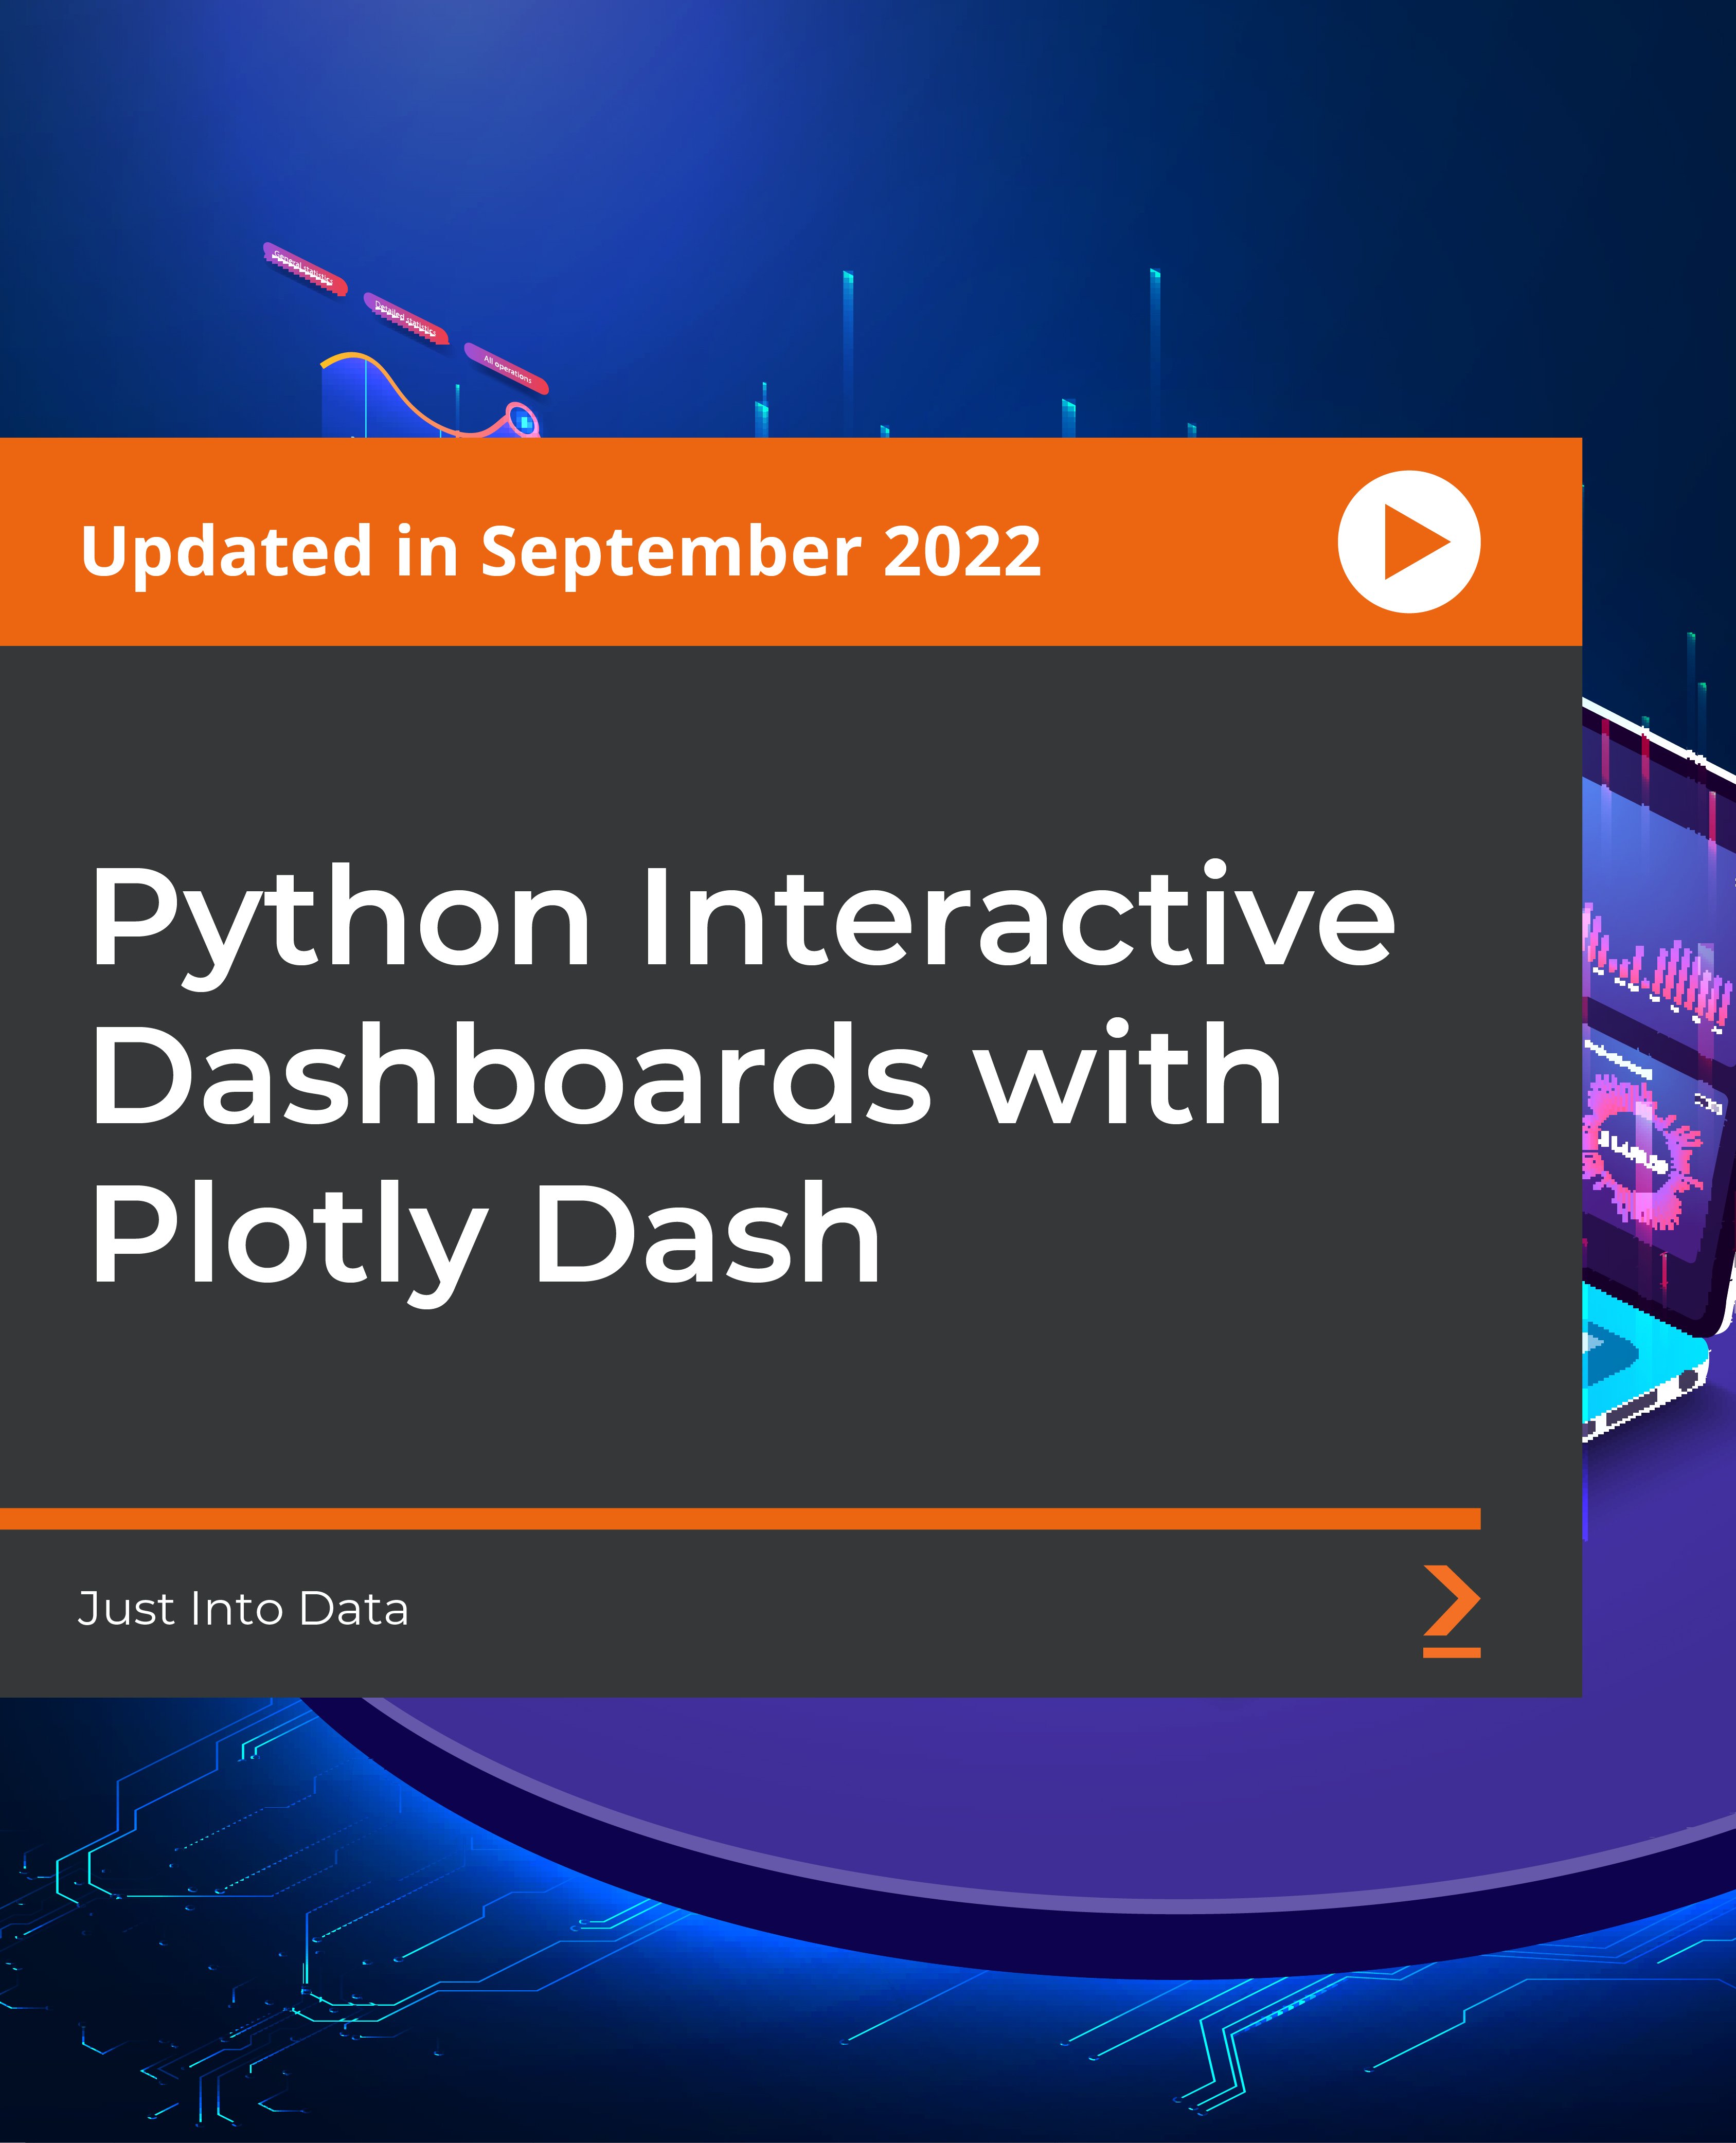 Python Interactive Dashboards with Plotly Dash